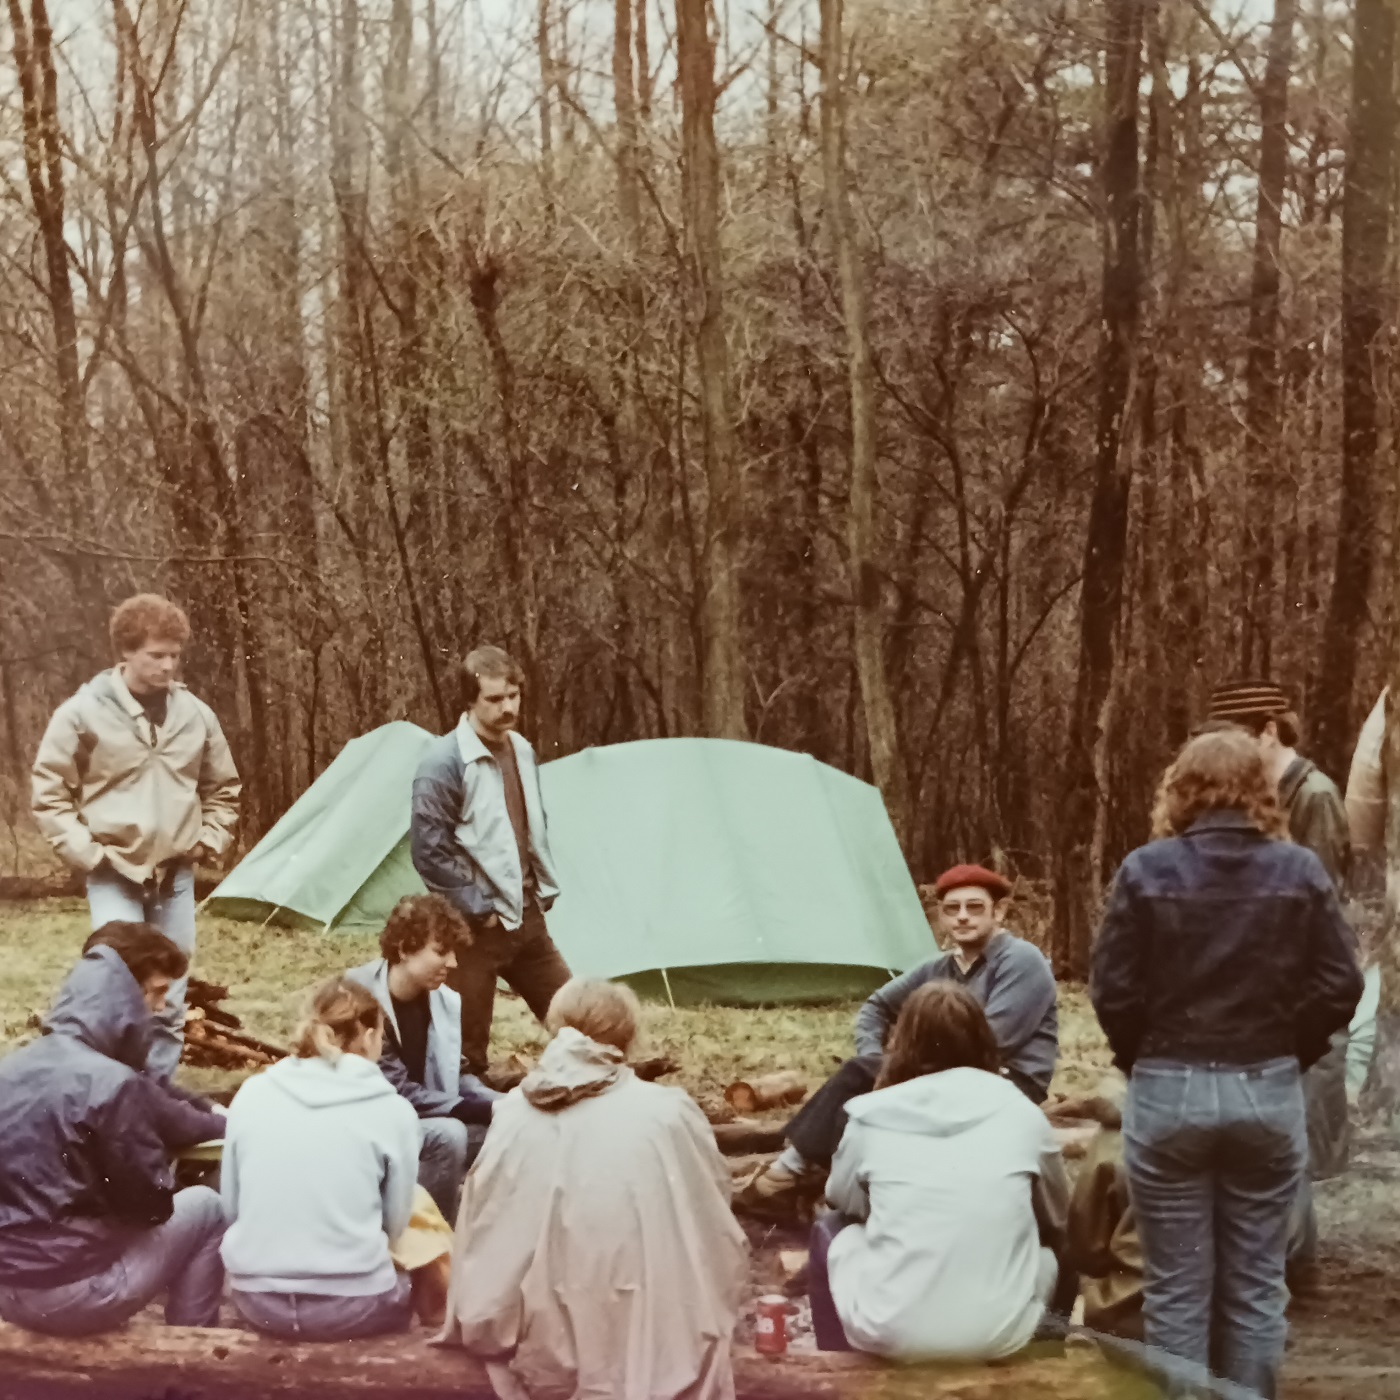 Ron Dingle is shown leading a camping trip with Ohio University students